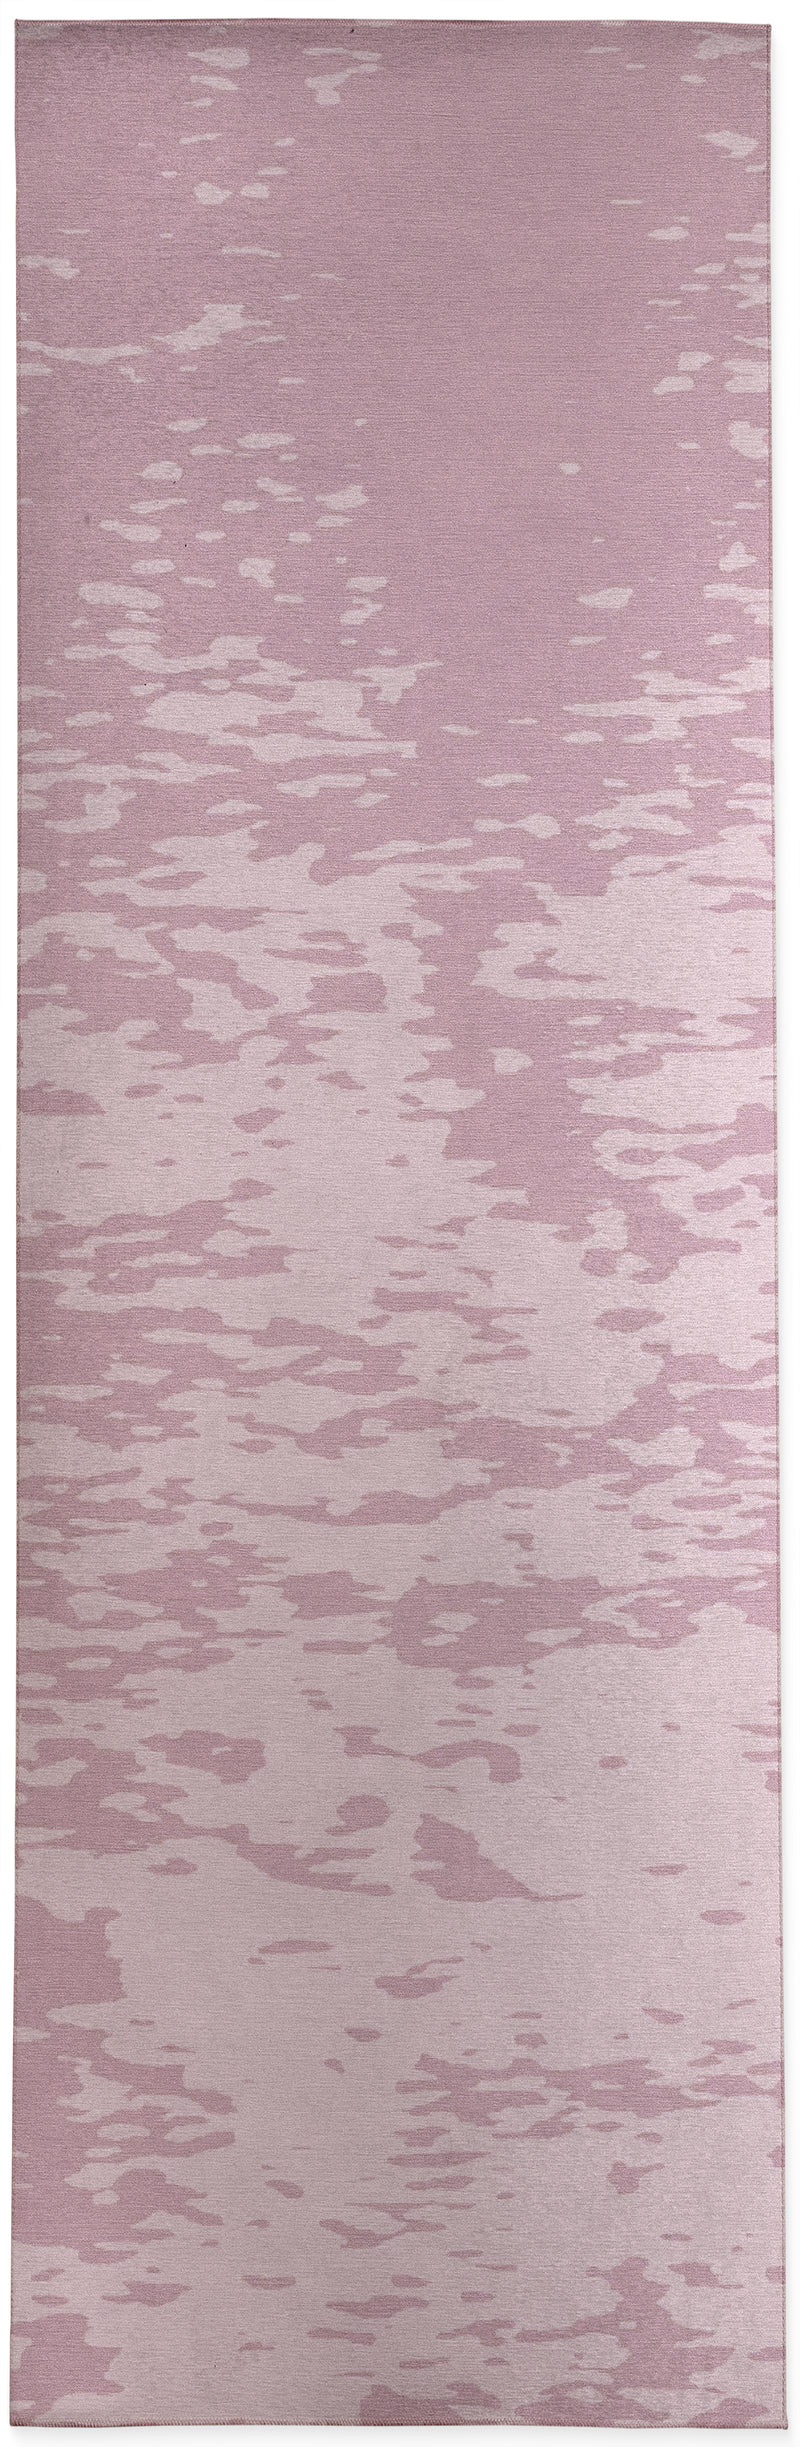 BOOGIE Outdoor Rug By Kavka Designs